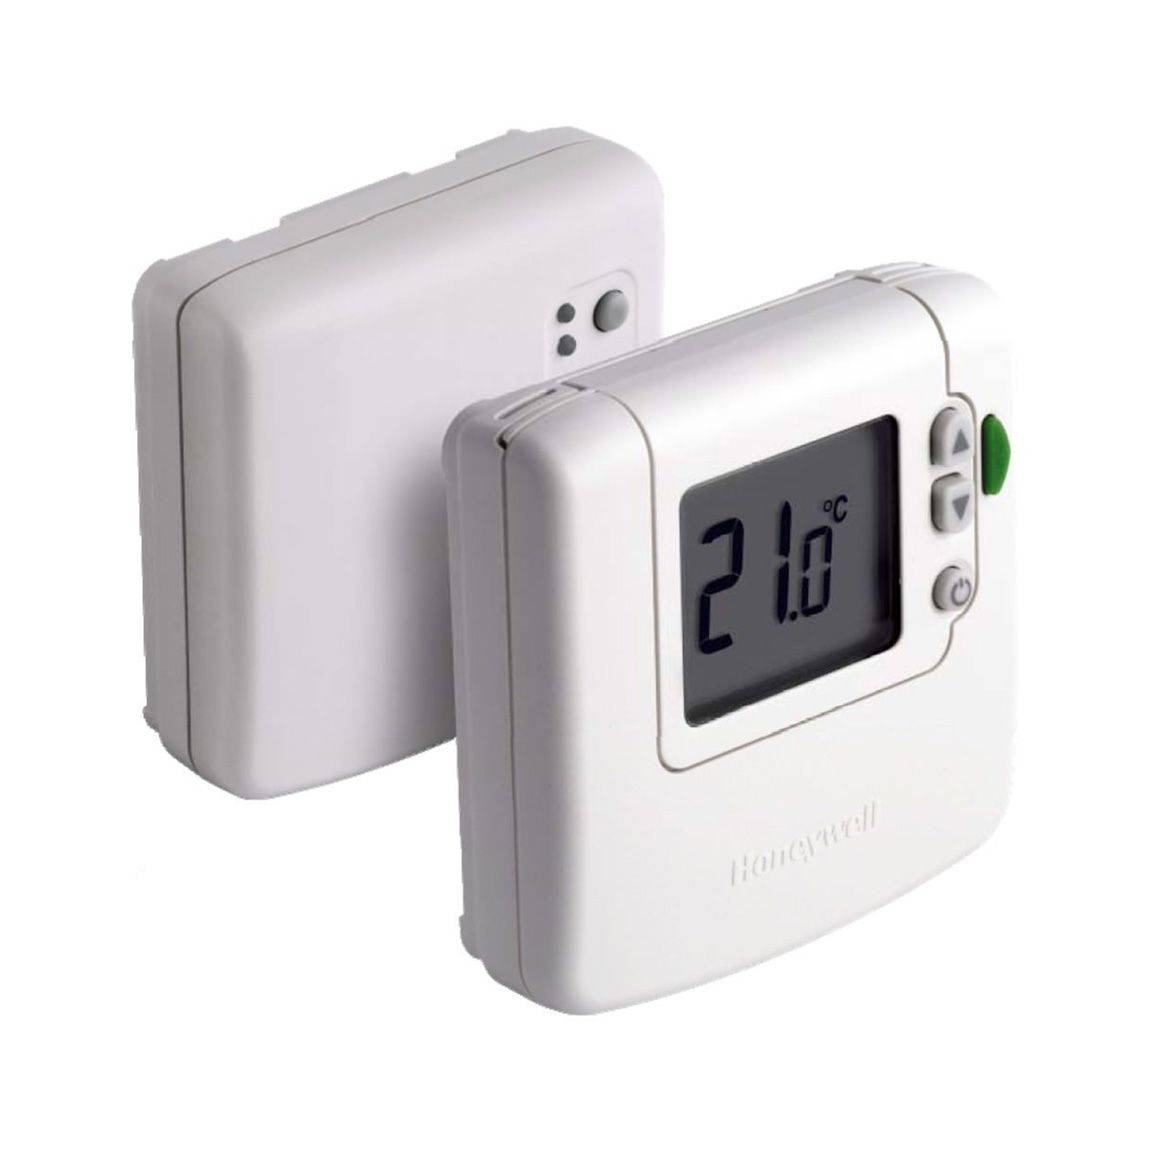 Honeywell DT90 has a digital non-programmable on/off thermostat with large LCD display and simple user interface